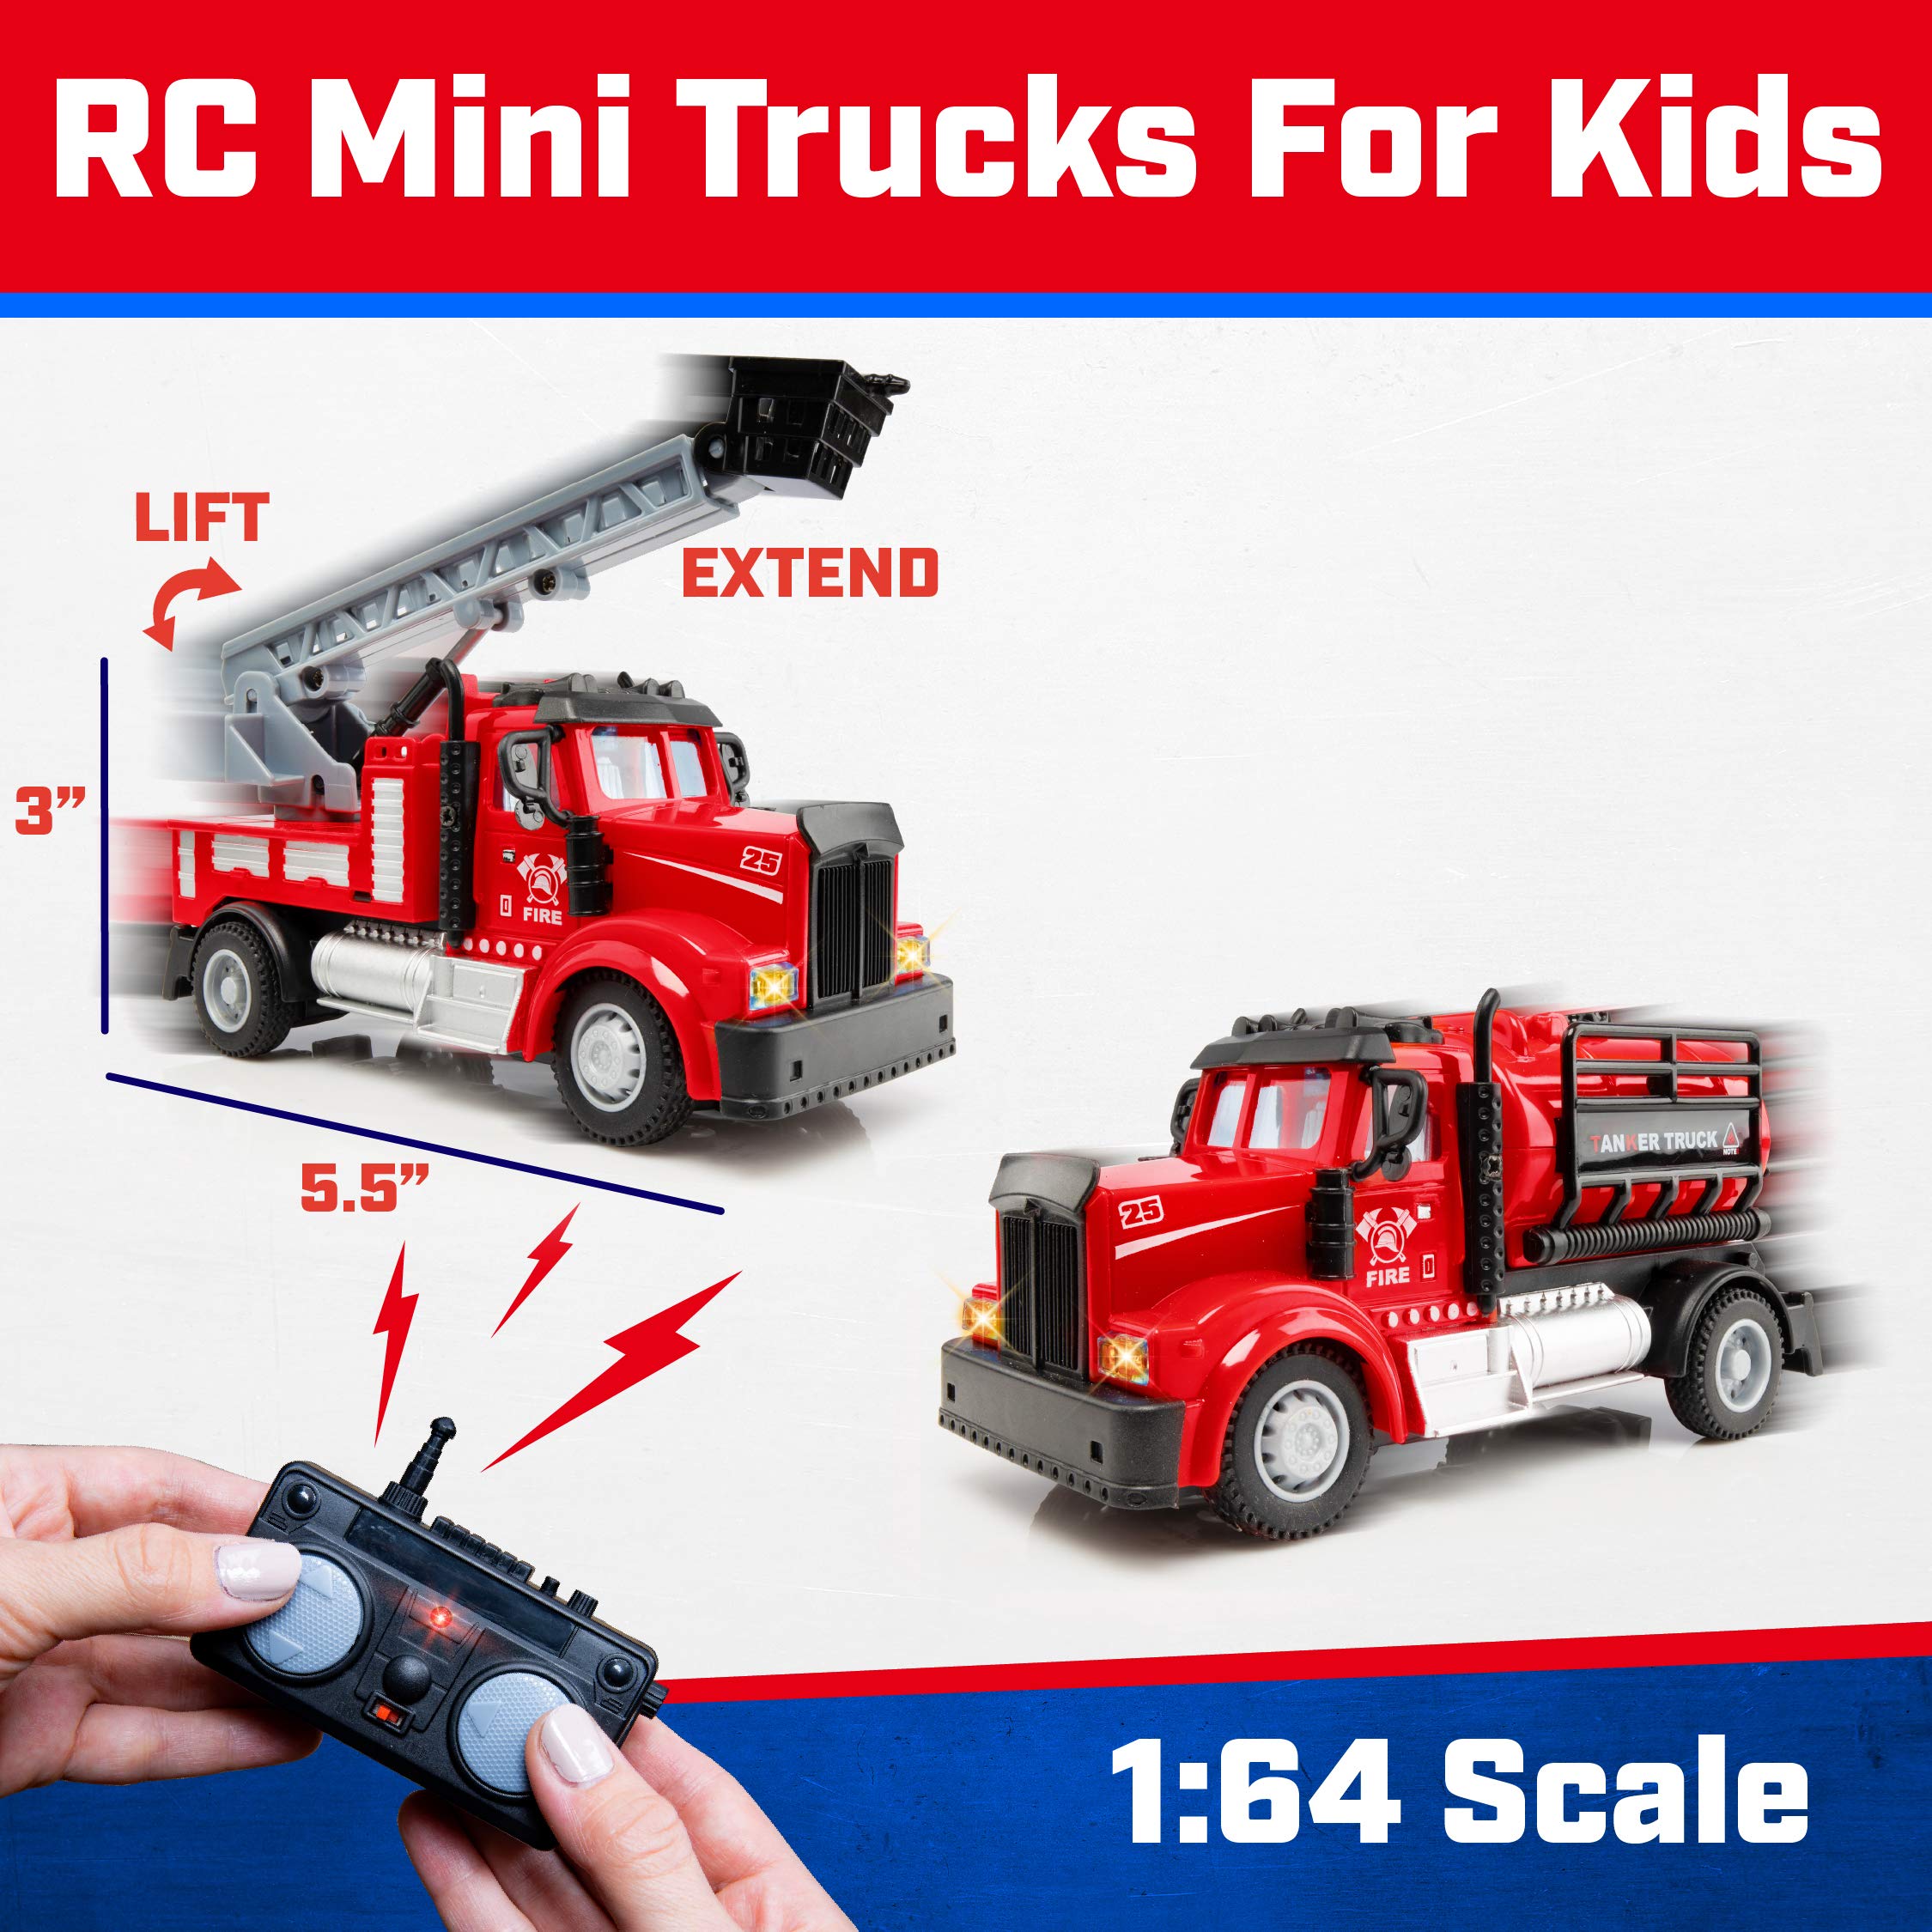 Force1 Mini RC Firetrucks Toys for Kids - 2 Pack Remote Control Kid Fire Truck Toy Set with Mini Water Tank and Boom Toy Fire Trucks for Boys or Girls, Rechargeable 2.4GHz Remote Firetruck with Lights